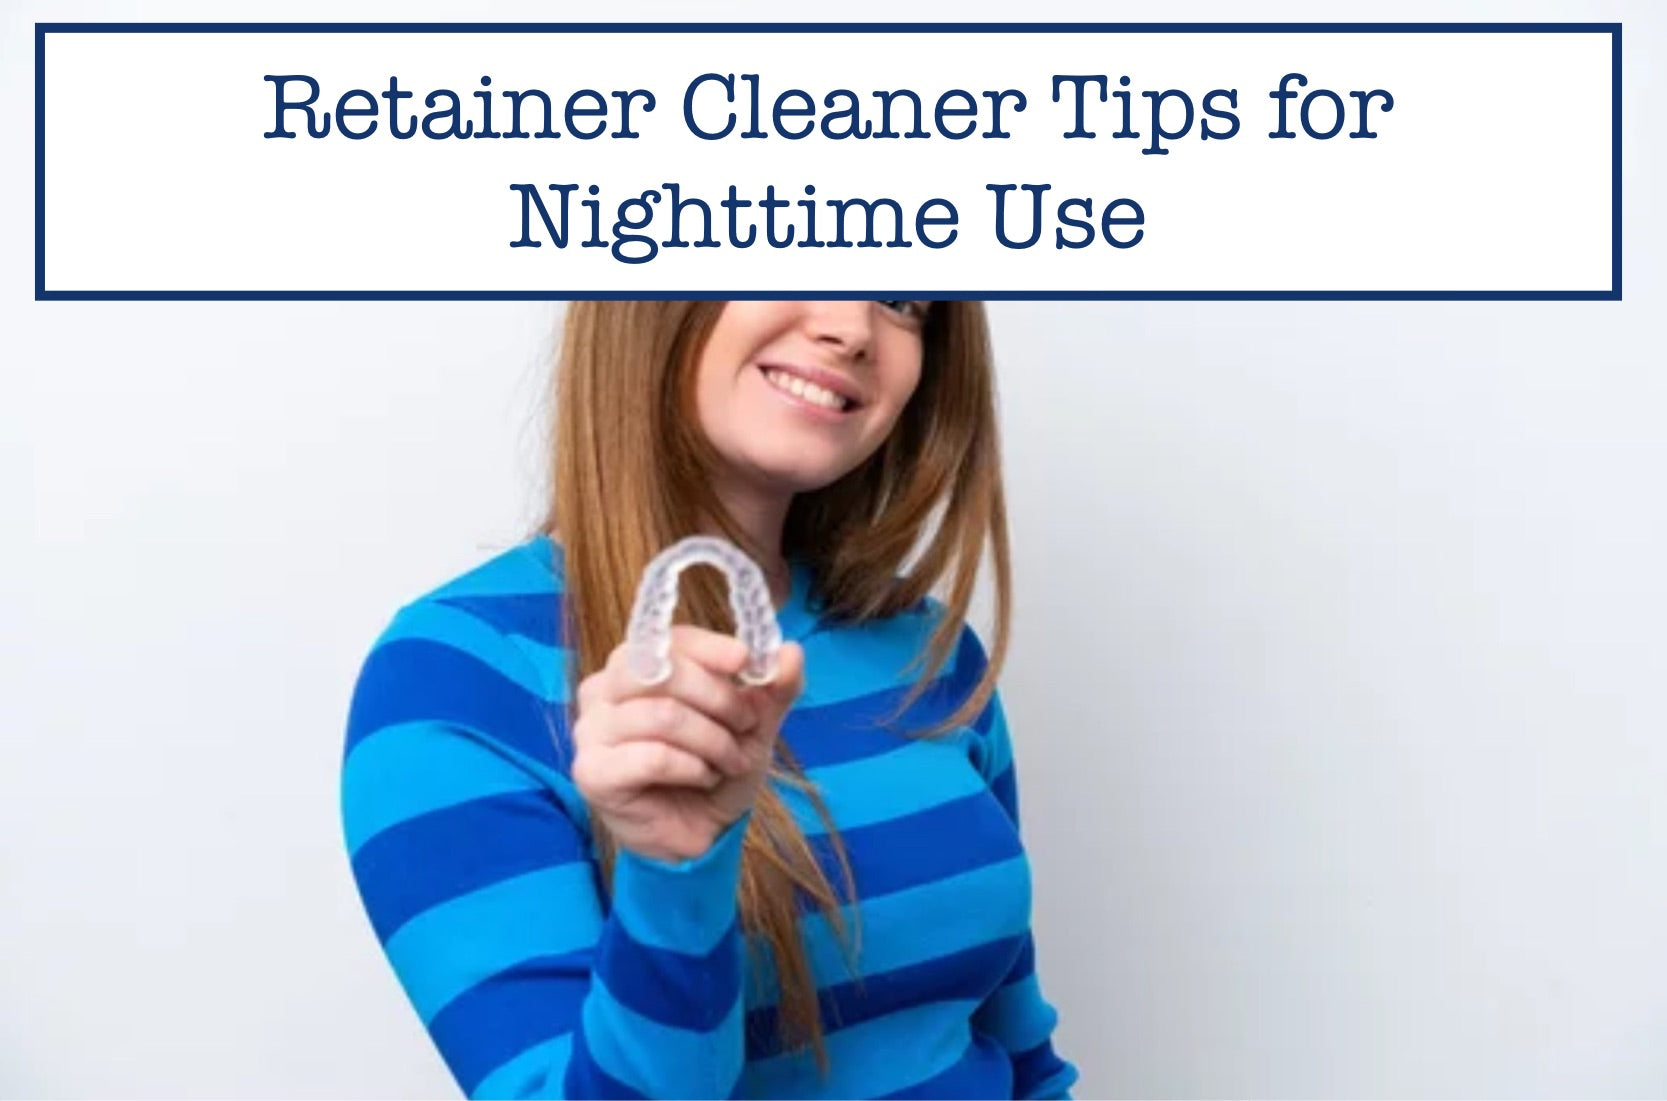 Retainer Cleaner Tips for Nighttime Use